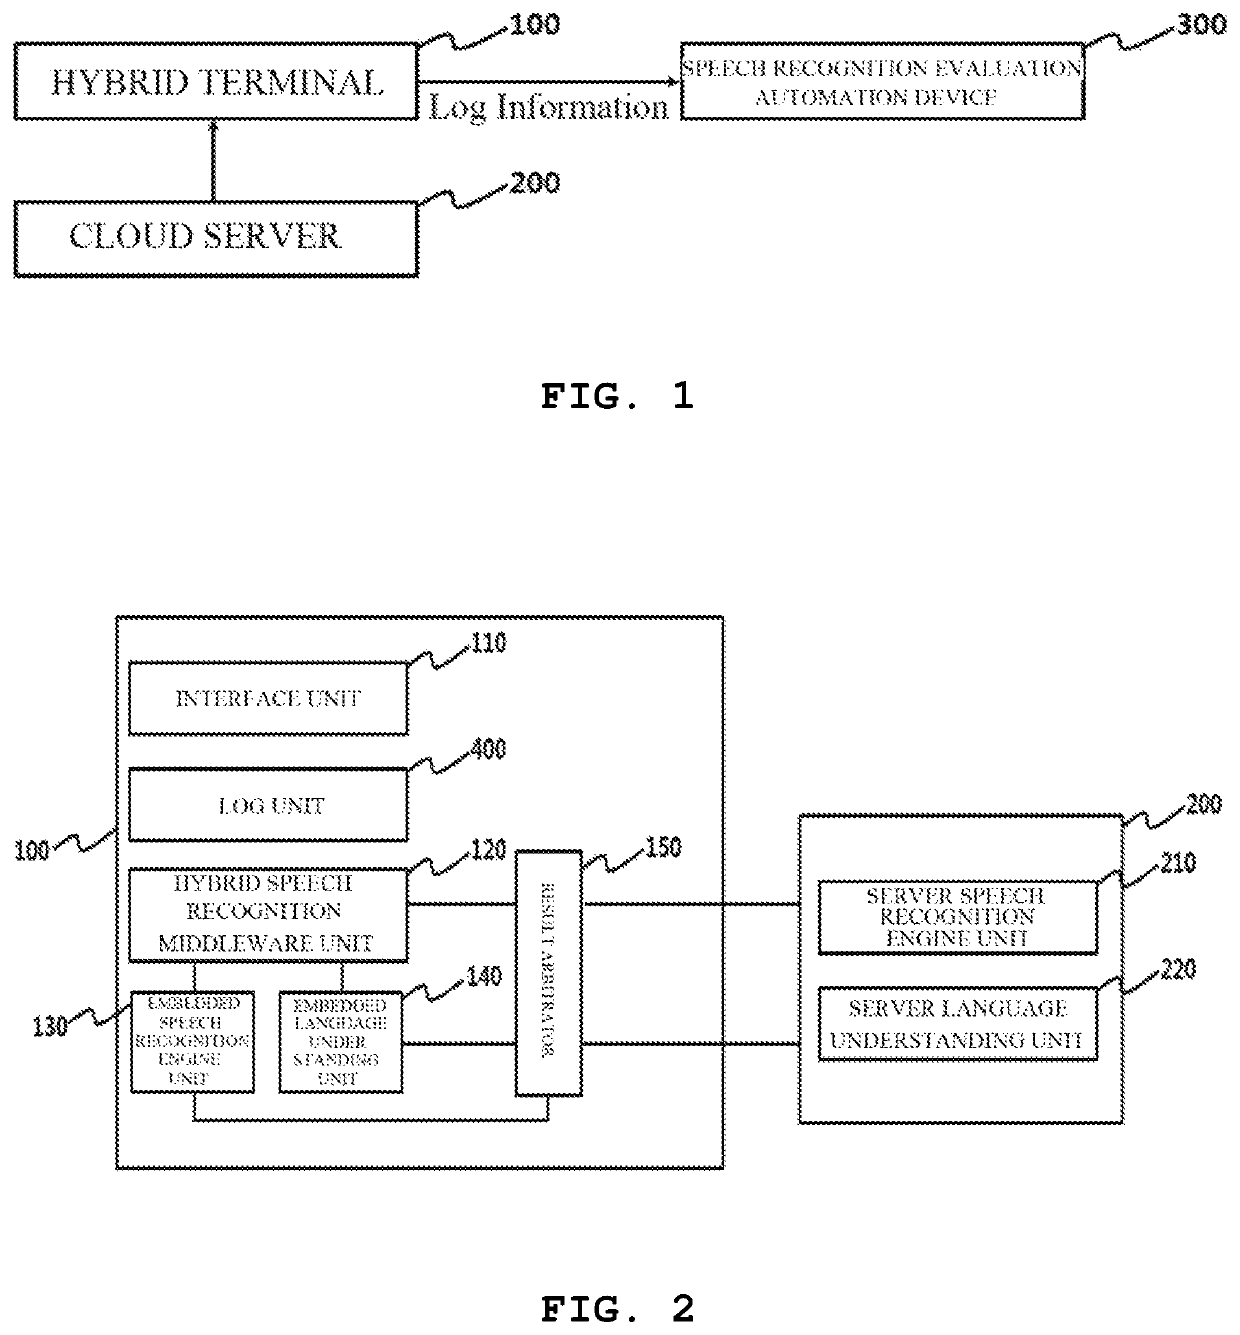 Automatic multi-performance evaluation system for hybrid speech recognition